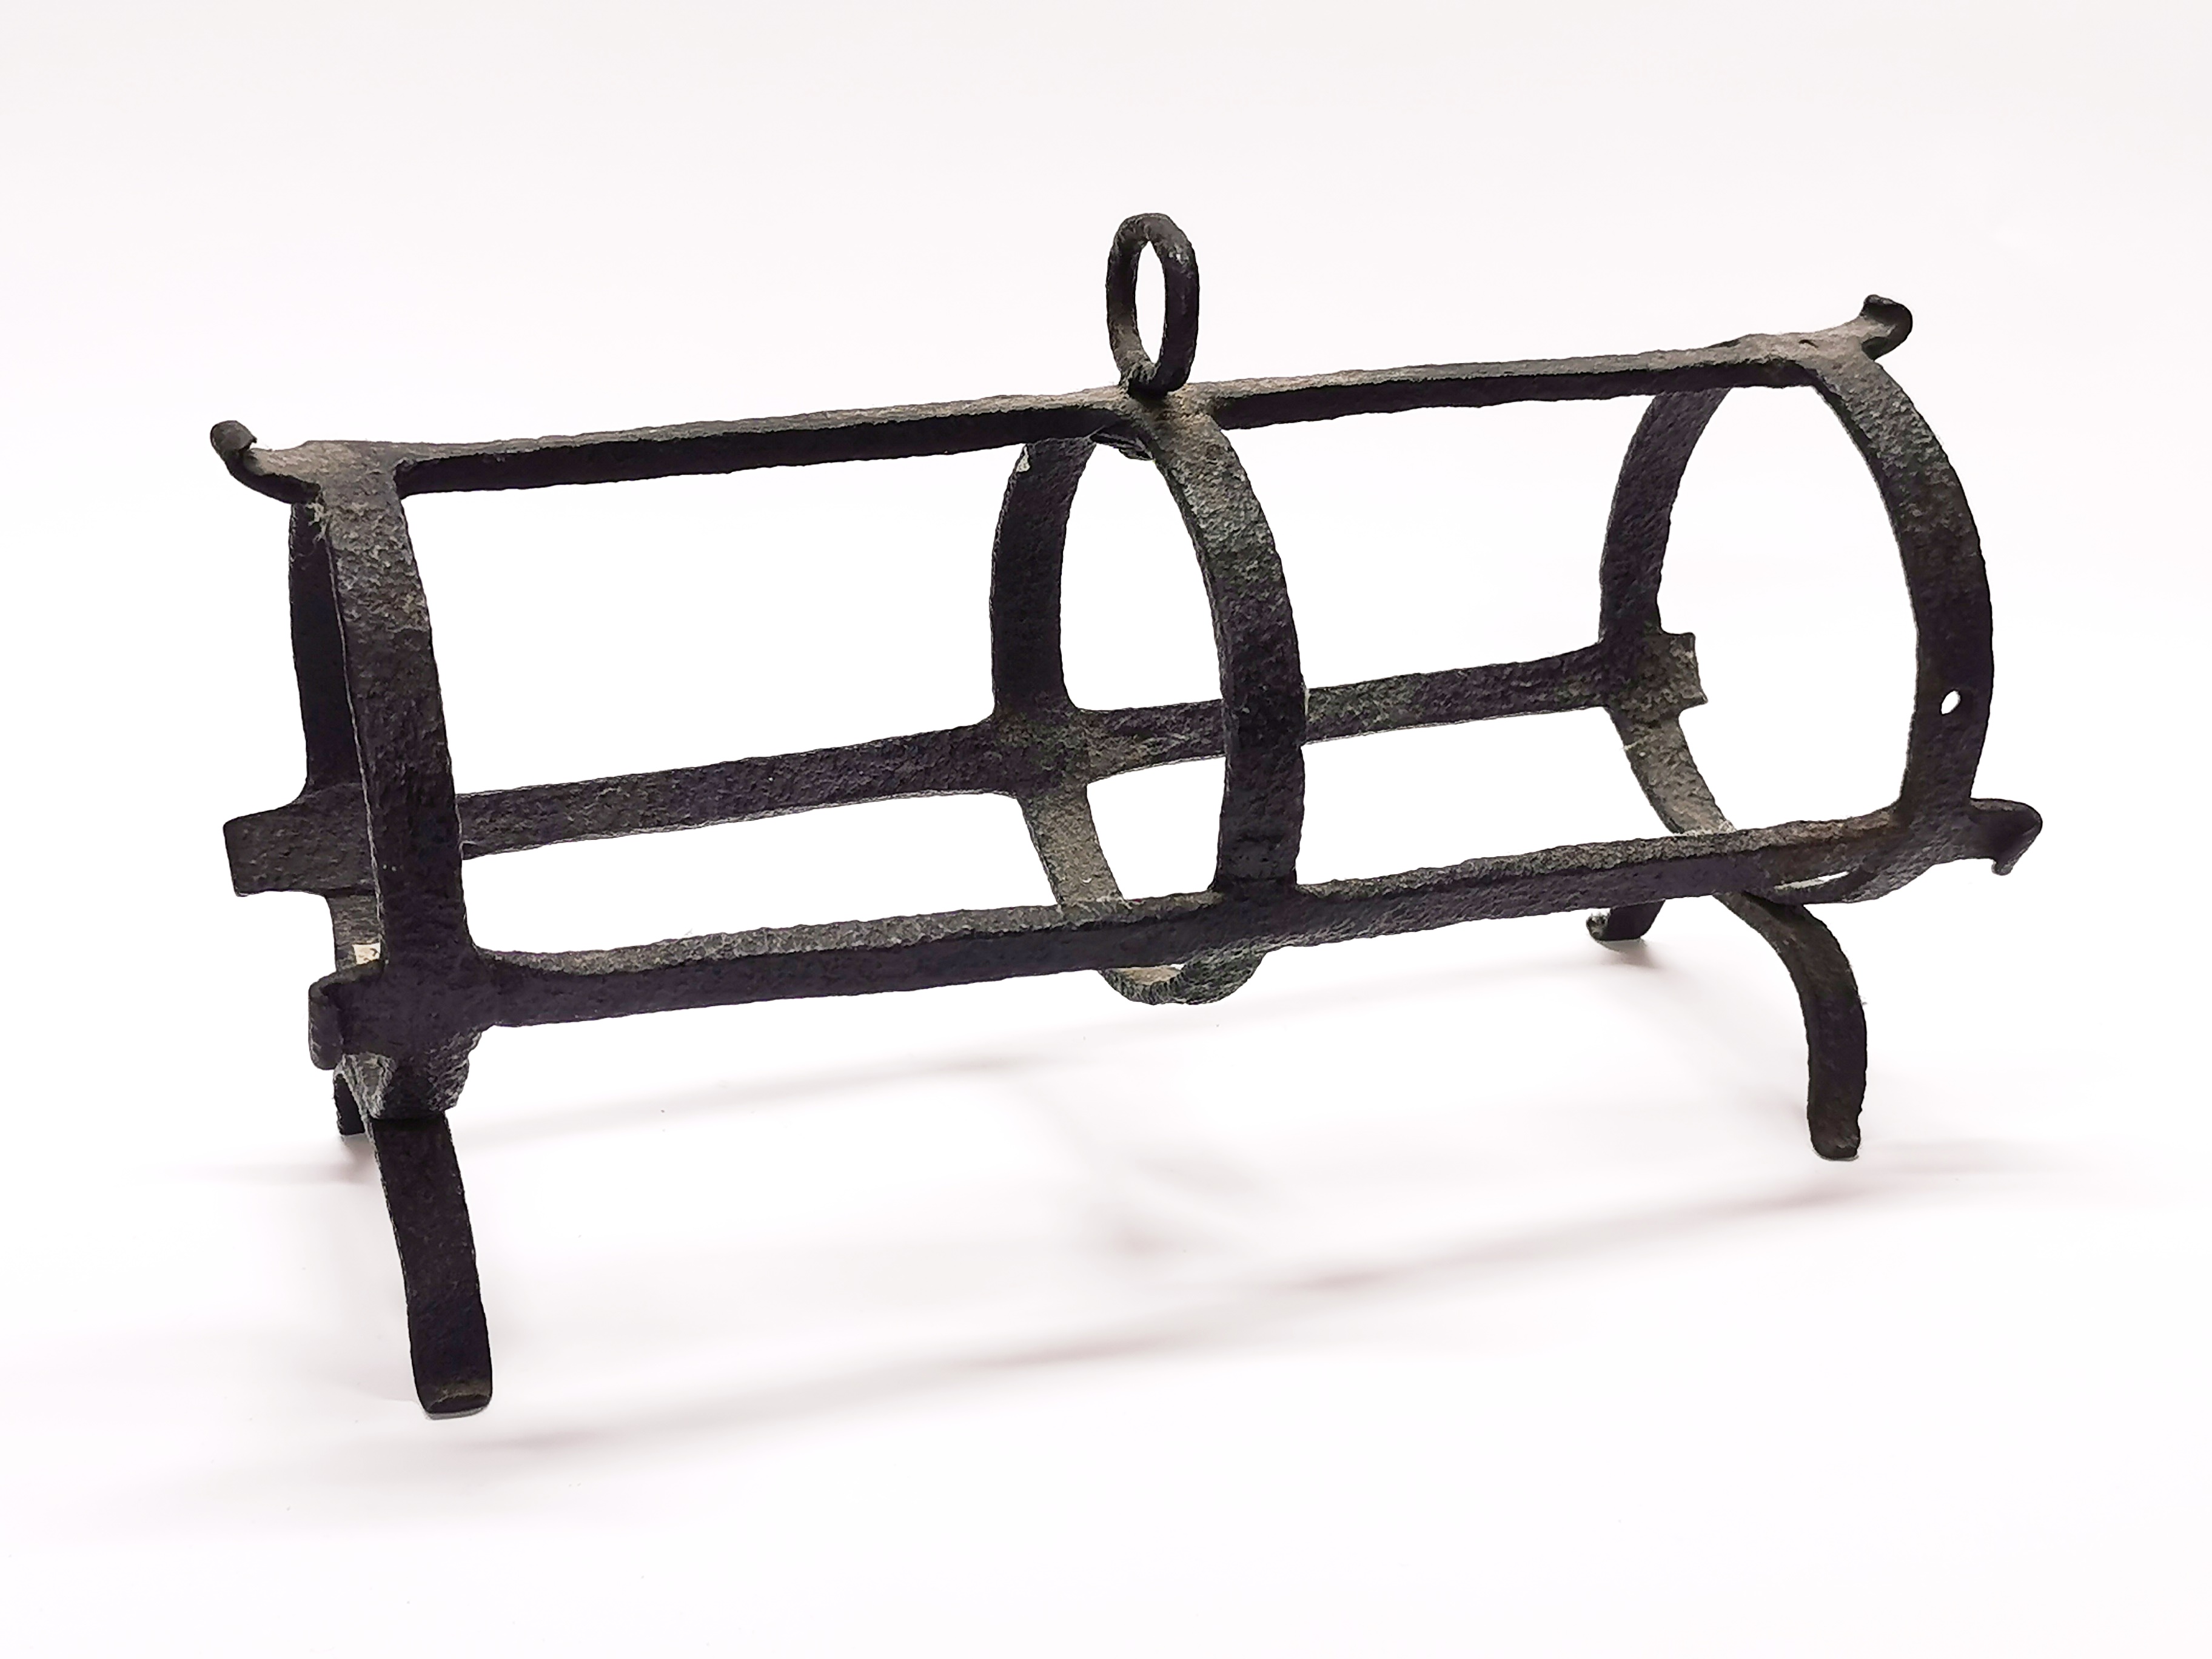 An 18th century wrought iron pipe kiln, L. 35cm. Prov. Estate of the late Dr. James (Jim) Bynon.